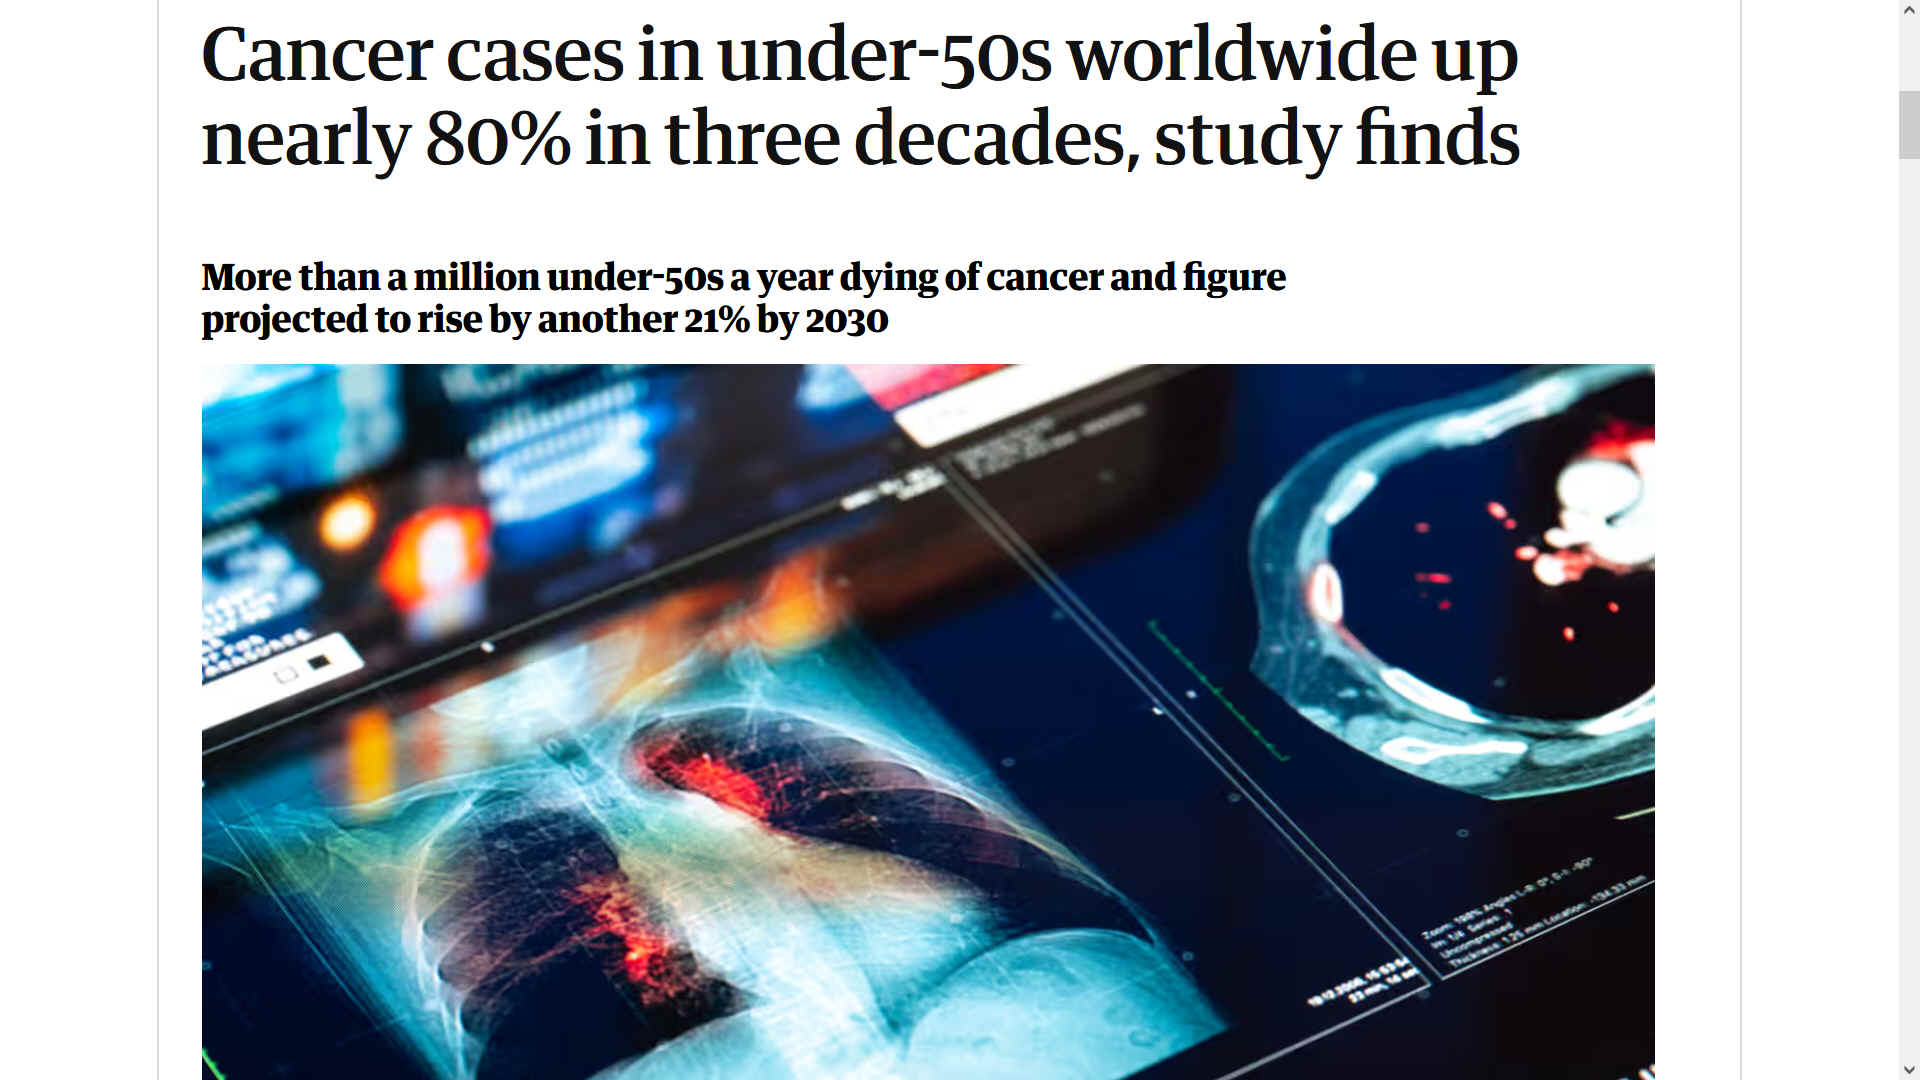 Global cases of early onset cancer increased from 1.82 million in 1990 to 3.26 million in 2019, while cancer deaths of adults in their 40s, 30s or younger grew by 27%. More than a million under-50s a year are now dying of cancer, the research reveals.